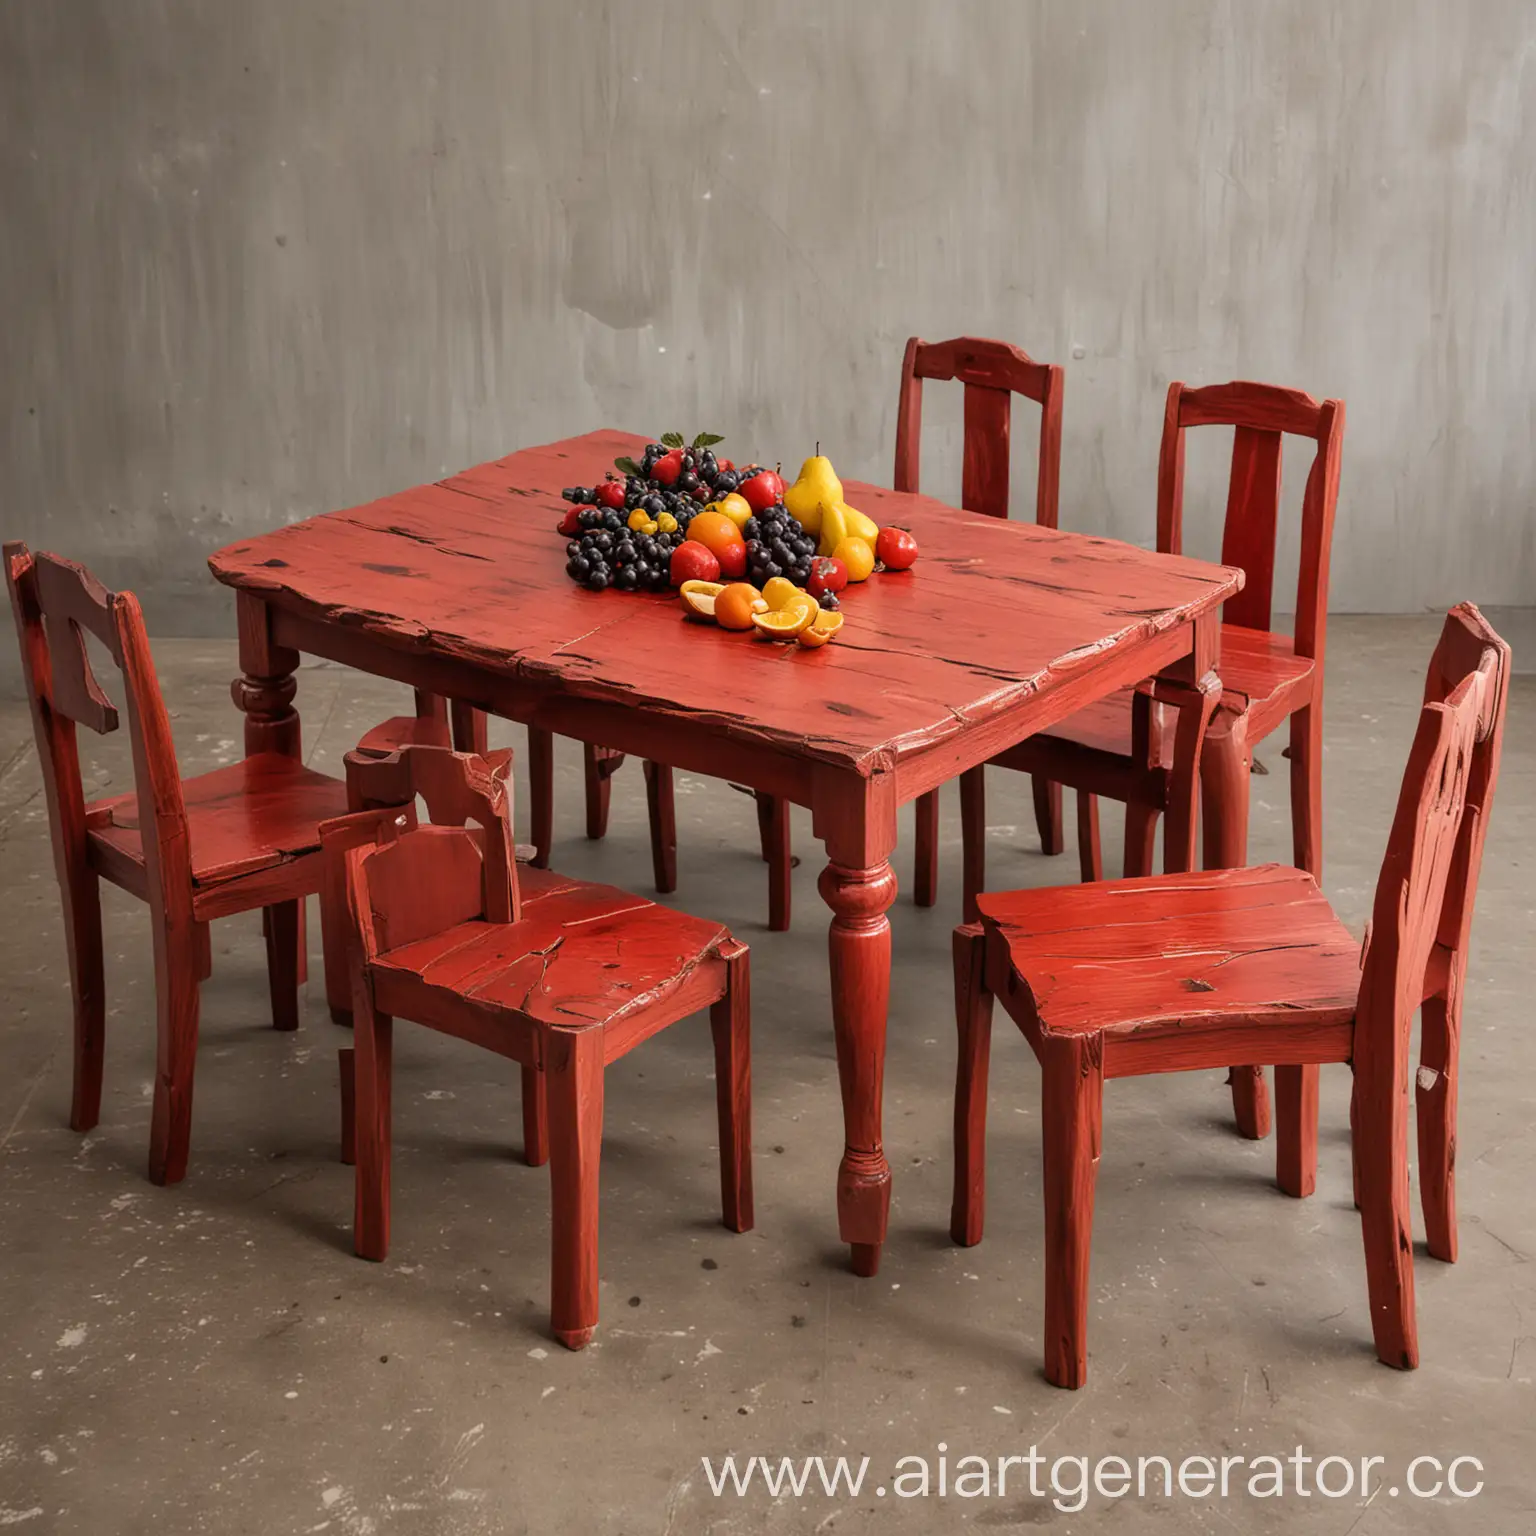 Elegant-Red-Wood-Dining-Table-Set-with-Fresh-Fruits-Displayed